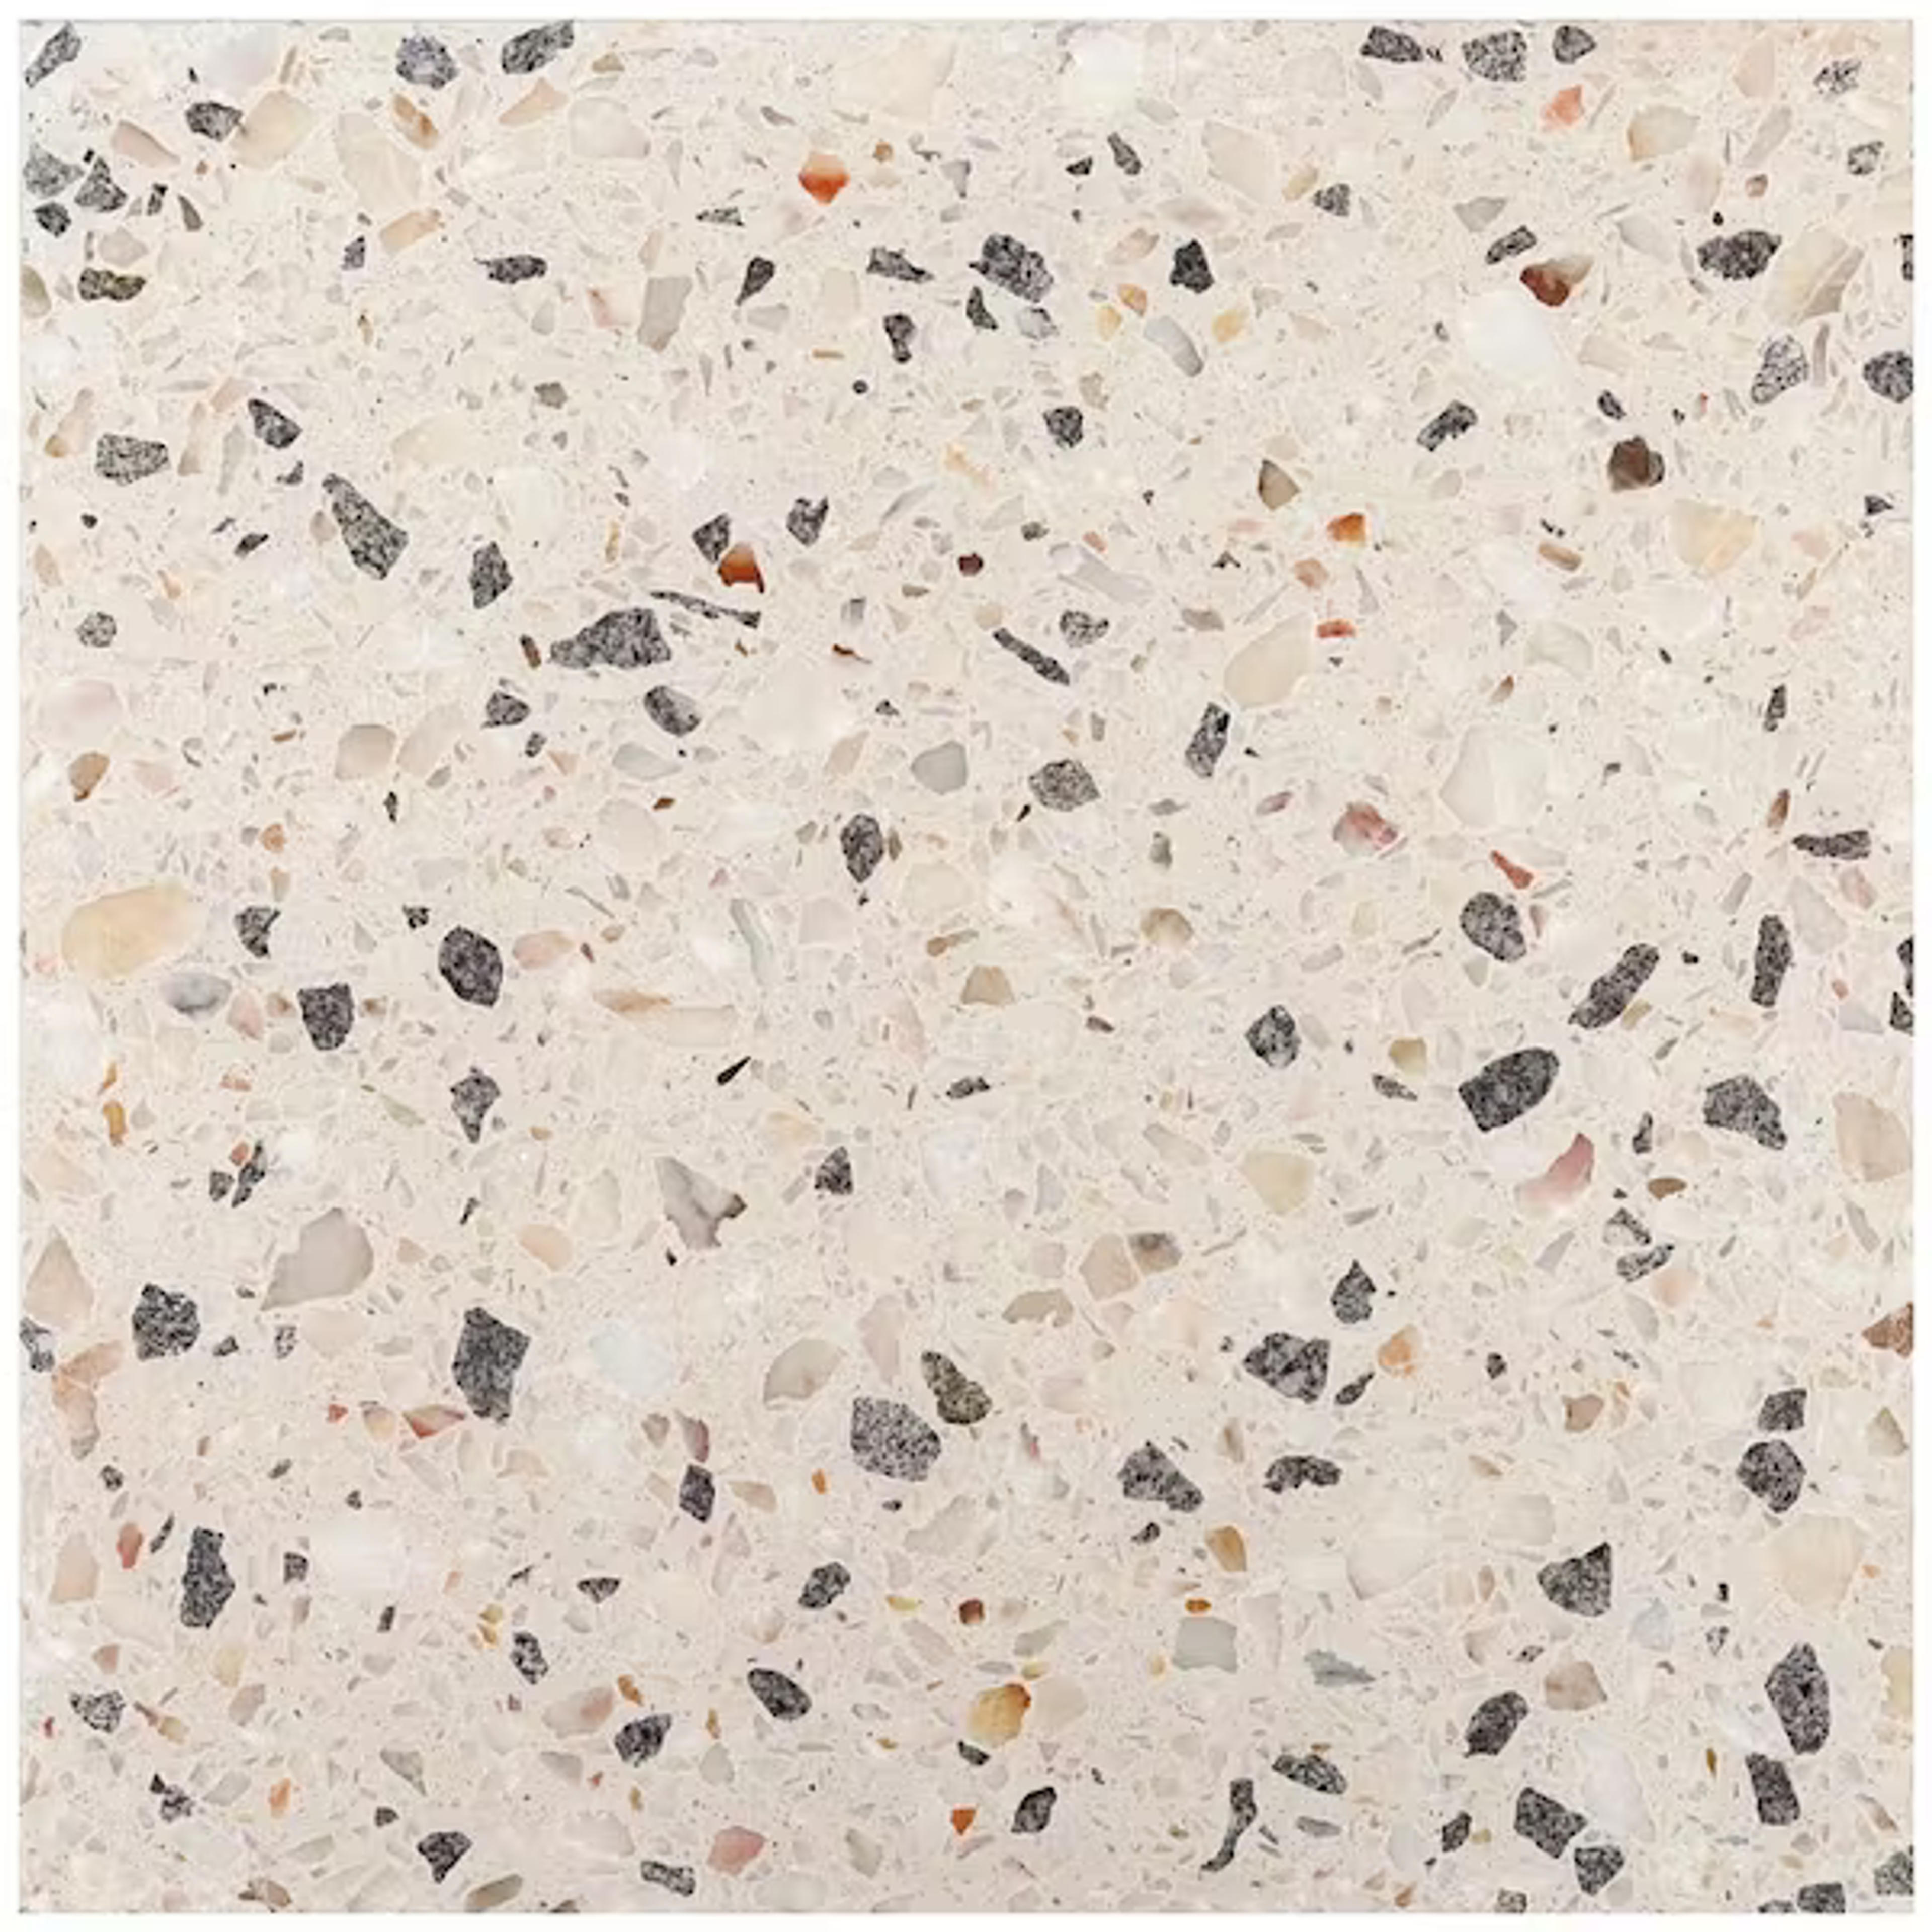 Ivy Hill Tile Raleigh Sonora 4 in. x 0.71 in. Polished Terrazzo Floor and Wall Tile Sample EXT3RD108039 - The Home Depot